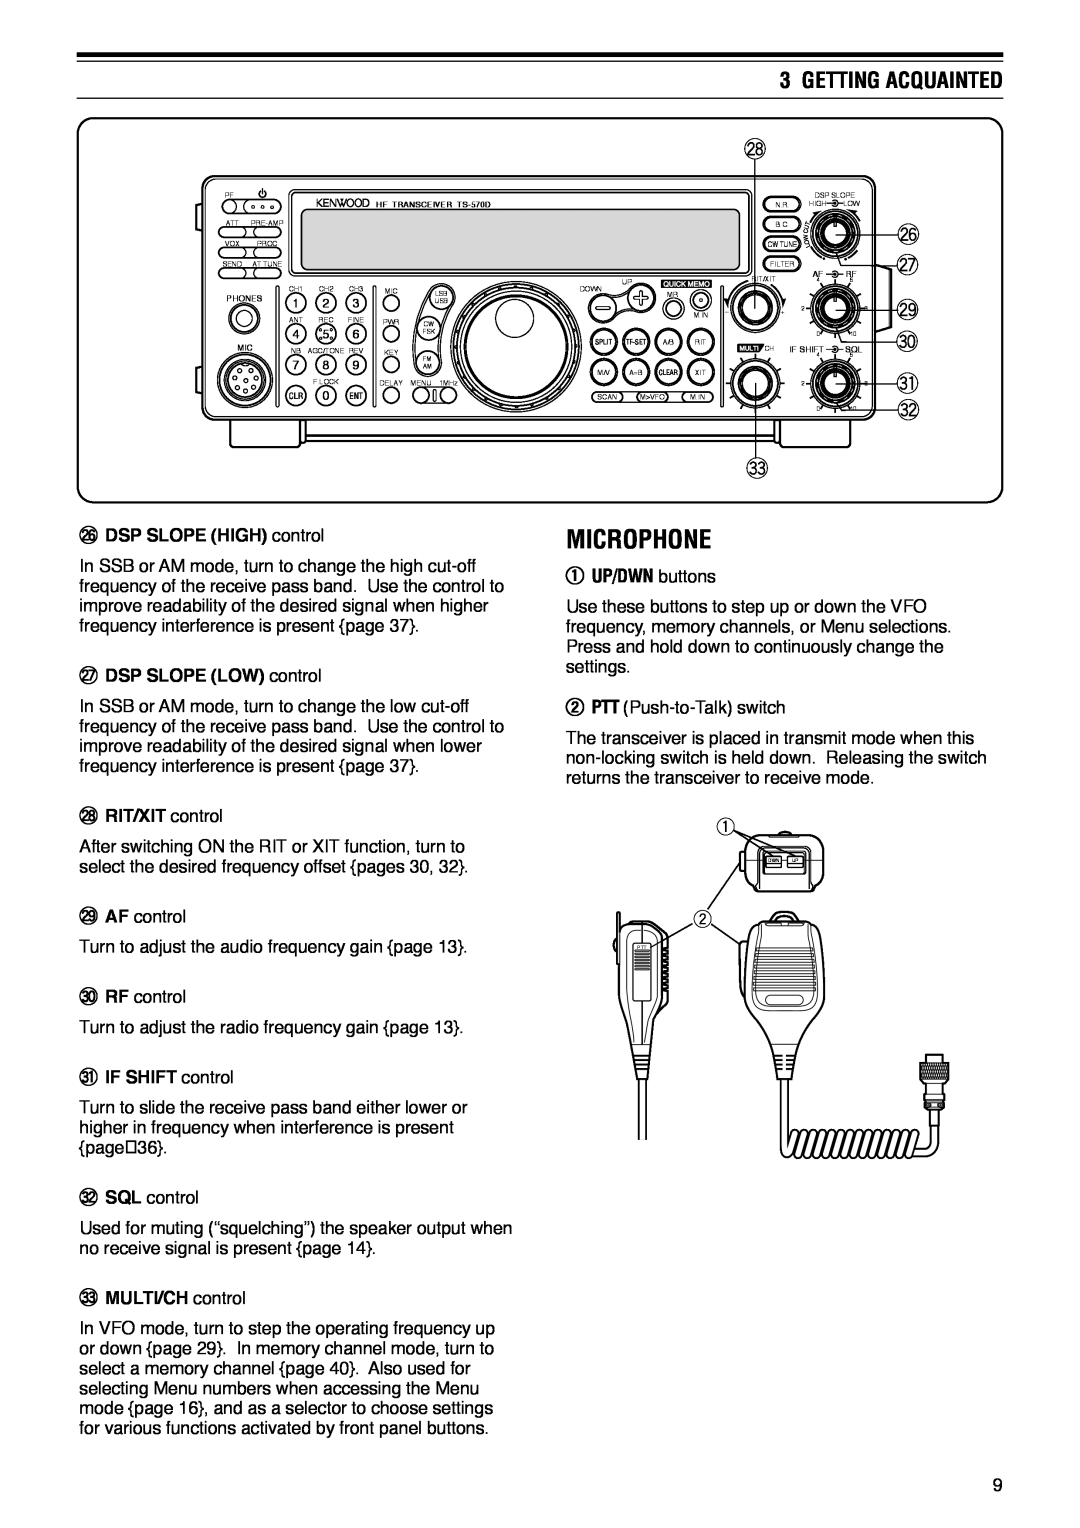 Kenwood TS-570D instruction manual Microphone, Getting Acquainted 